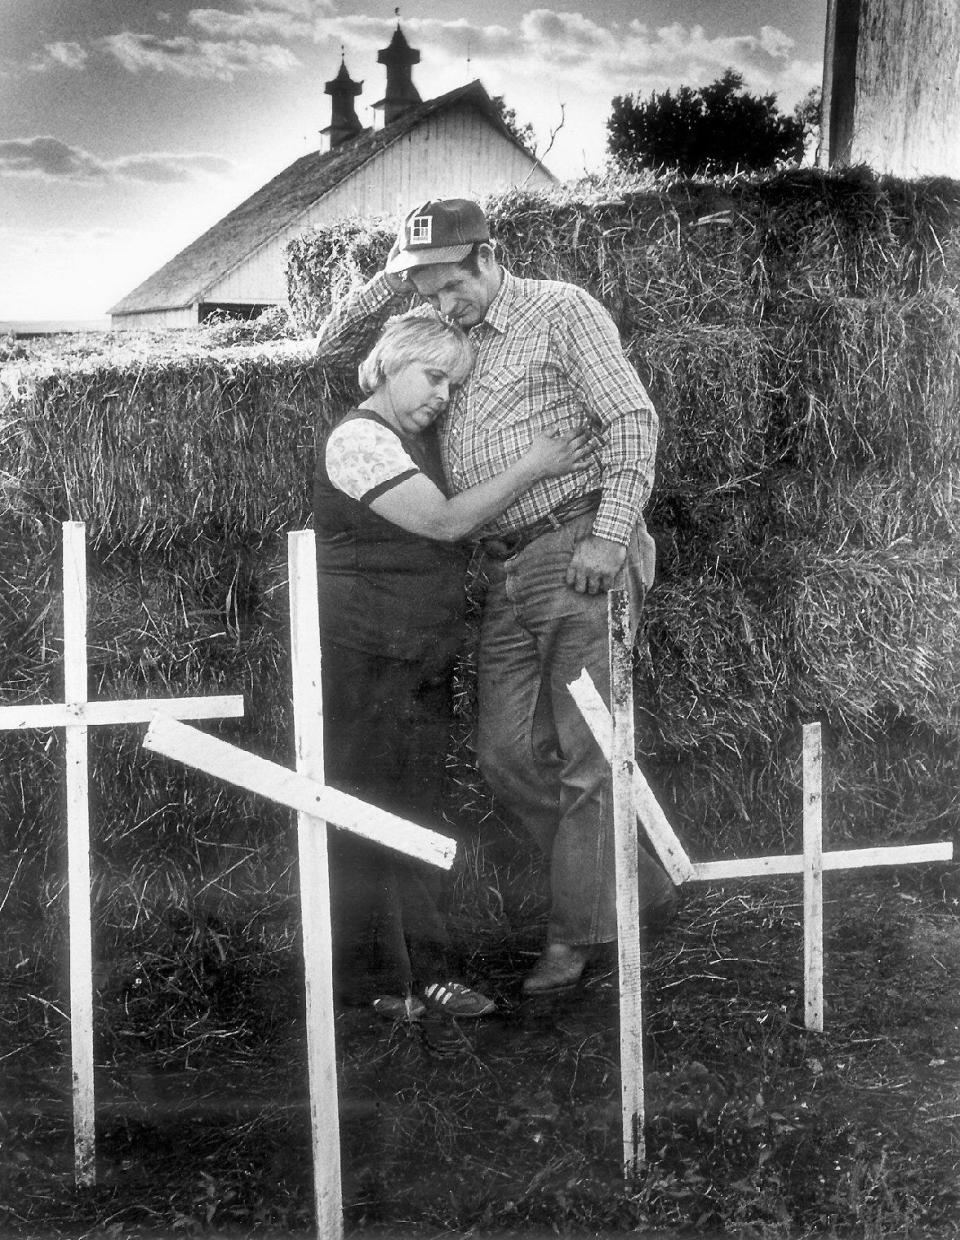 Pat and Elmer Steffes were hit hard by the farm crisis of the 1980s. This photo was part of a Pulitzer Prize-winning series by the Des Moines Register.